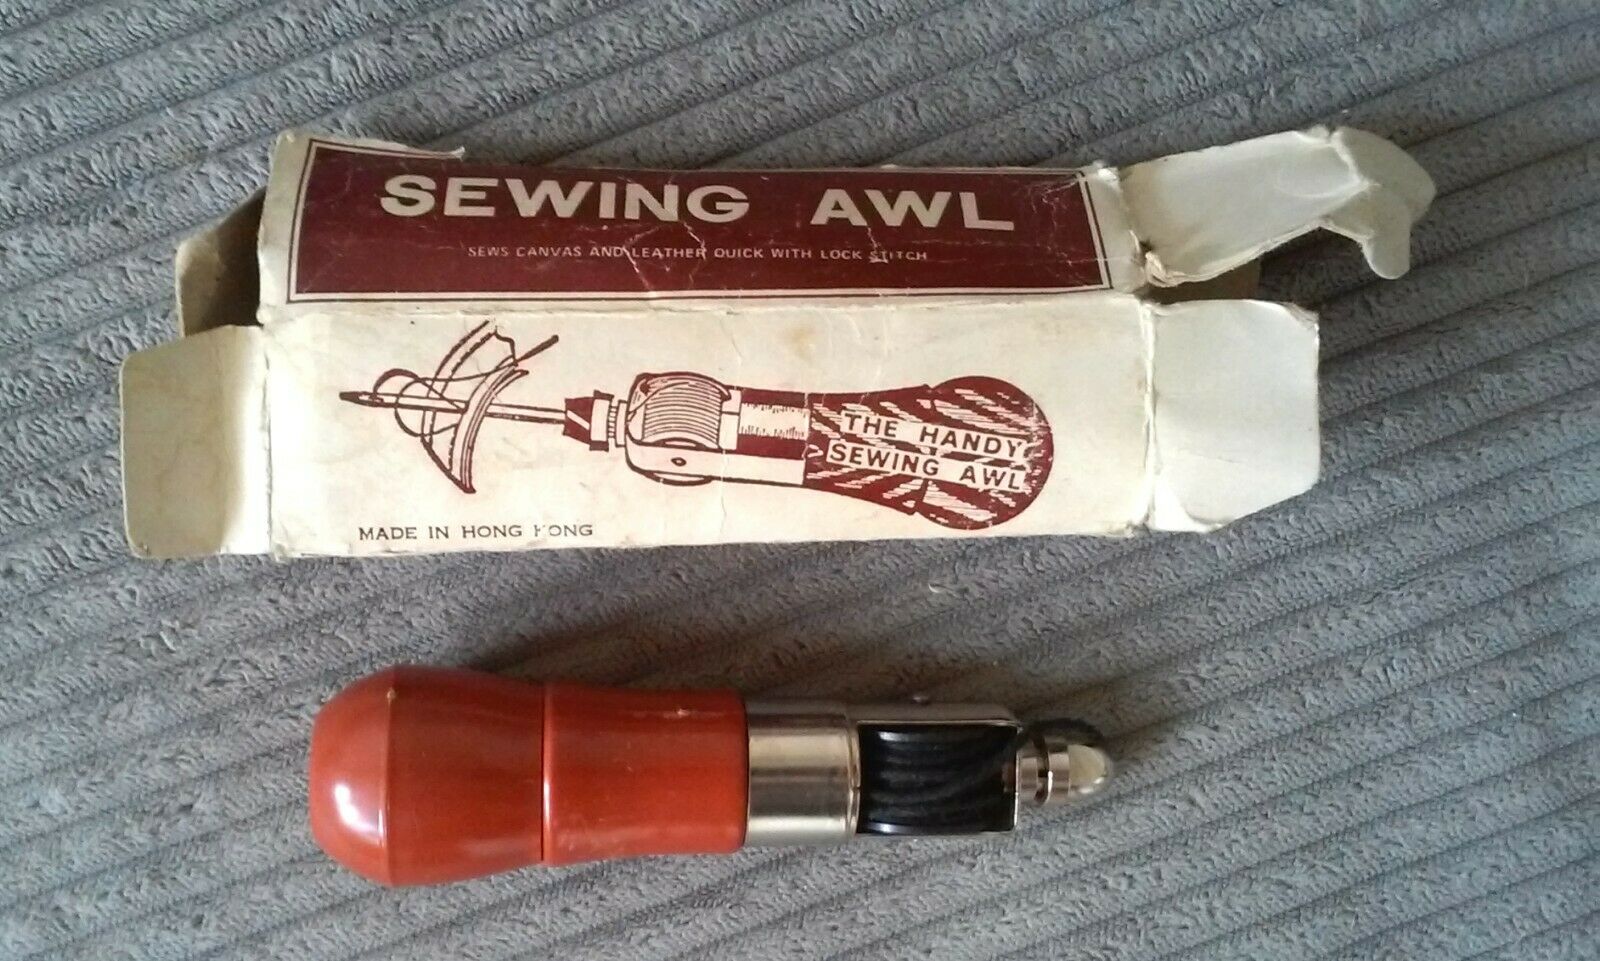 The Handy Sewing Awl